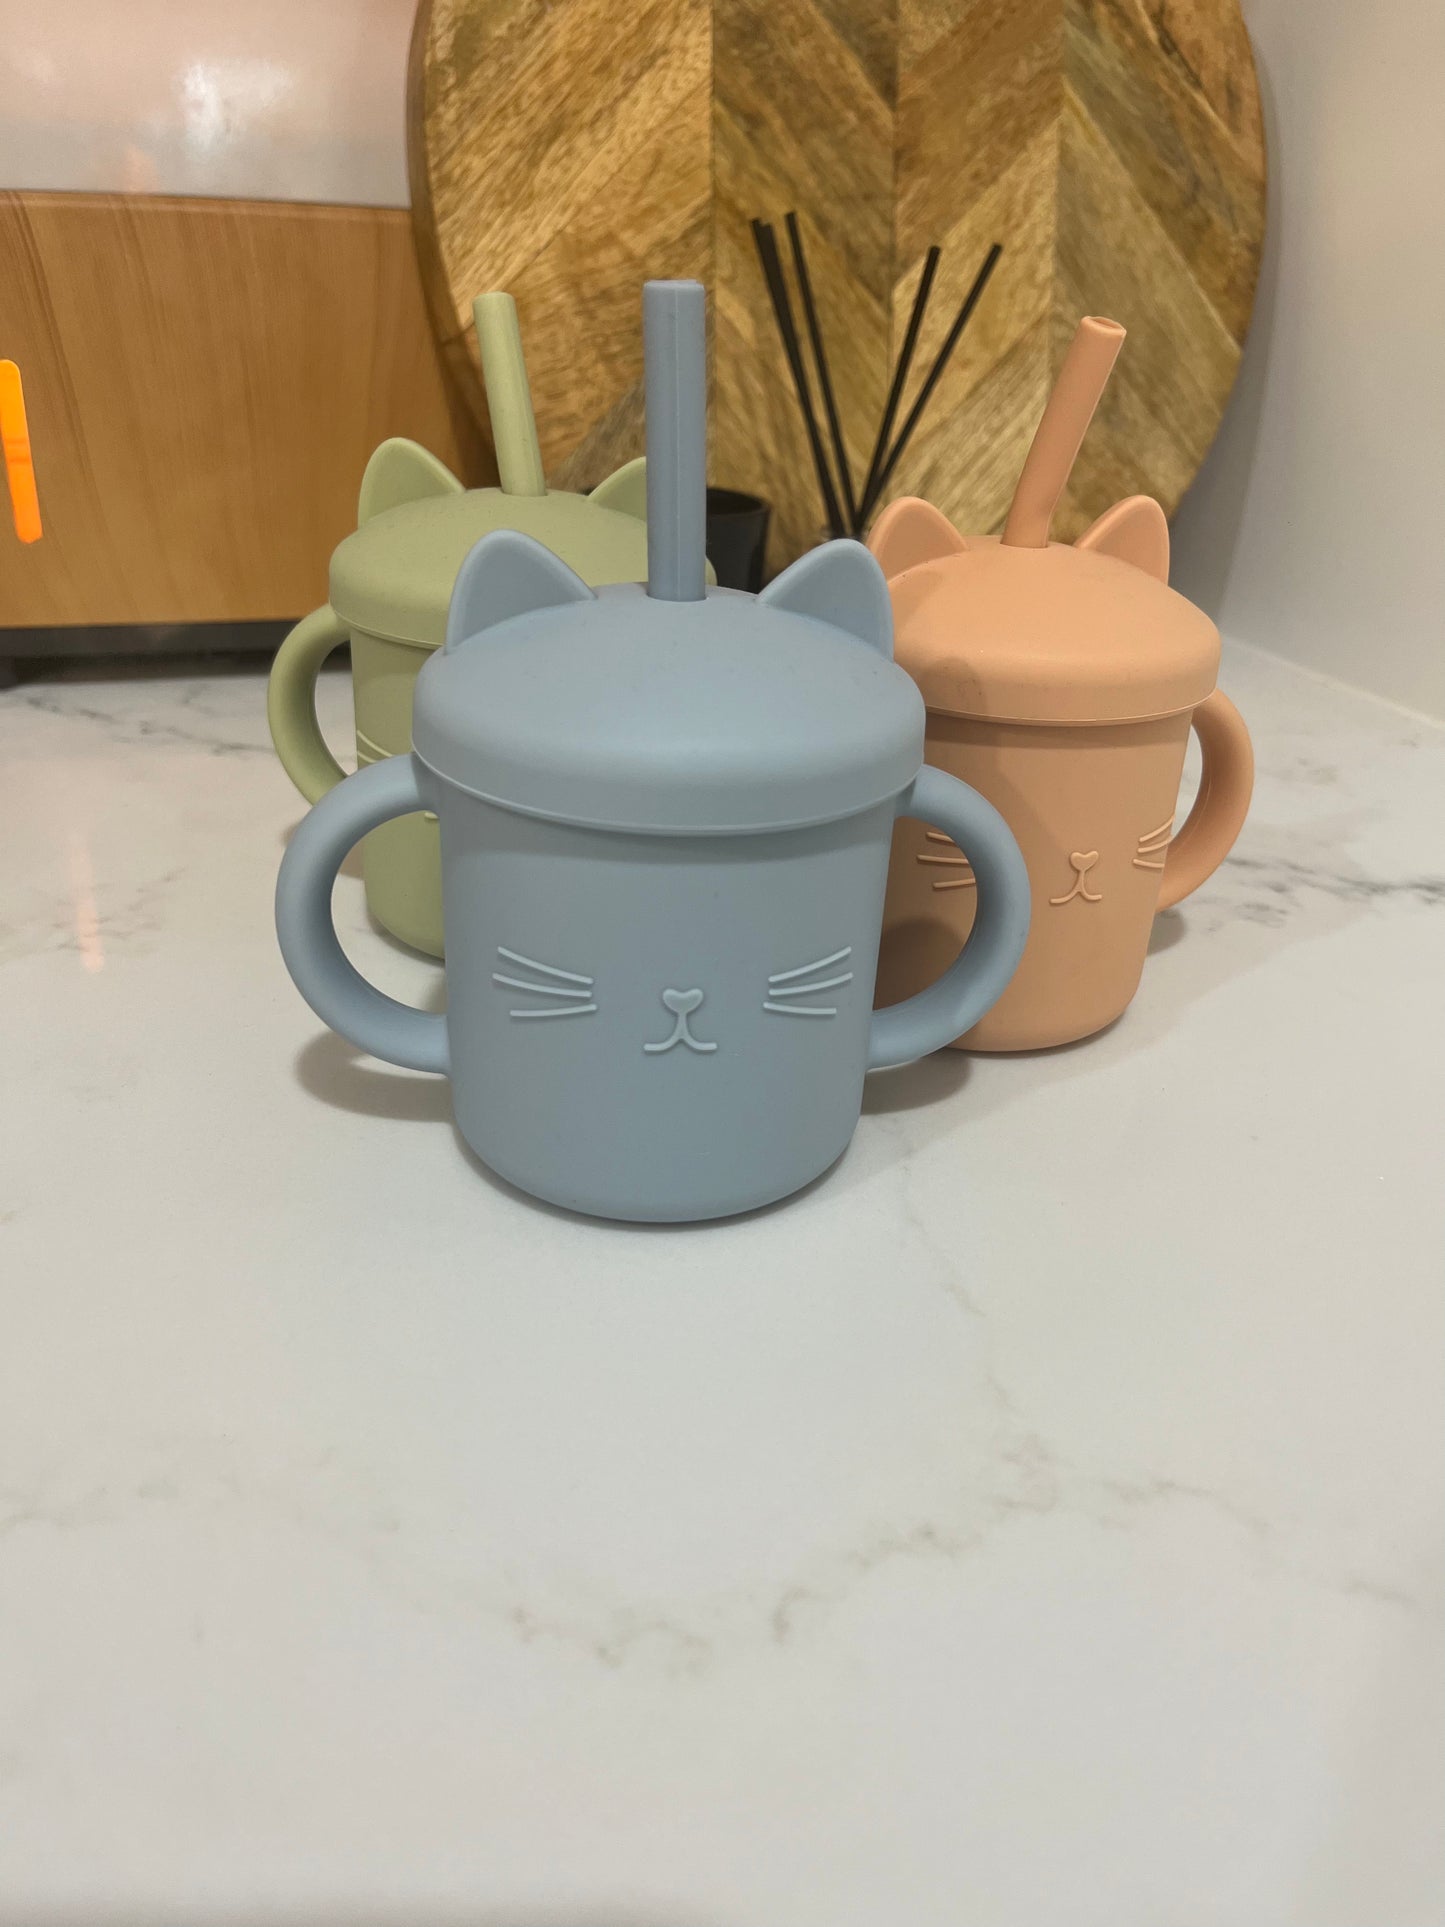 Silicone kitty sippy cup